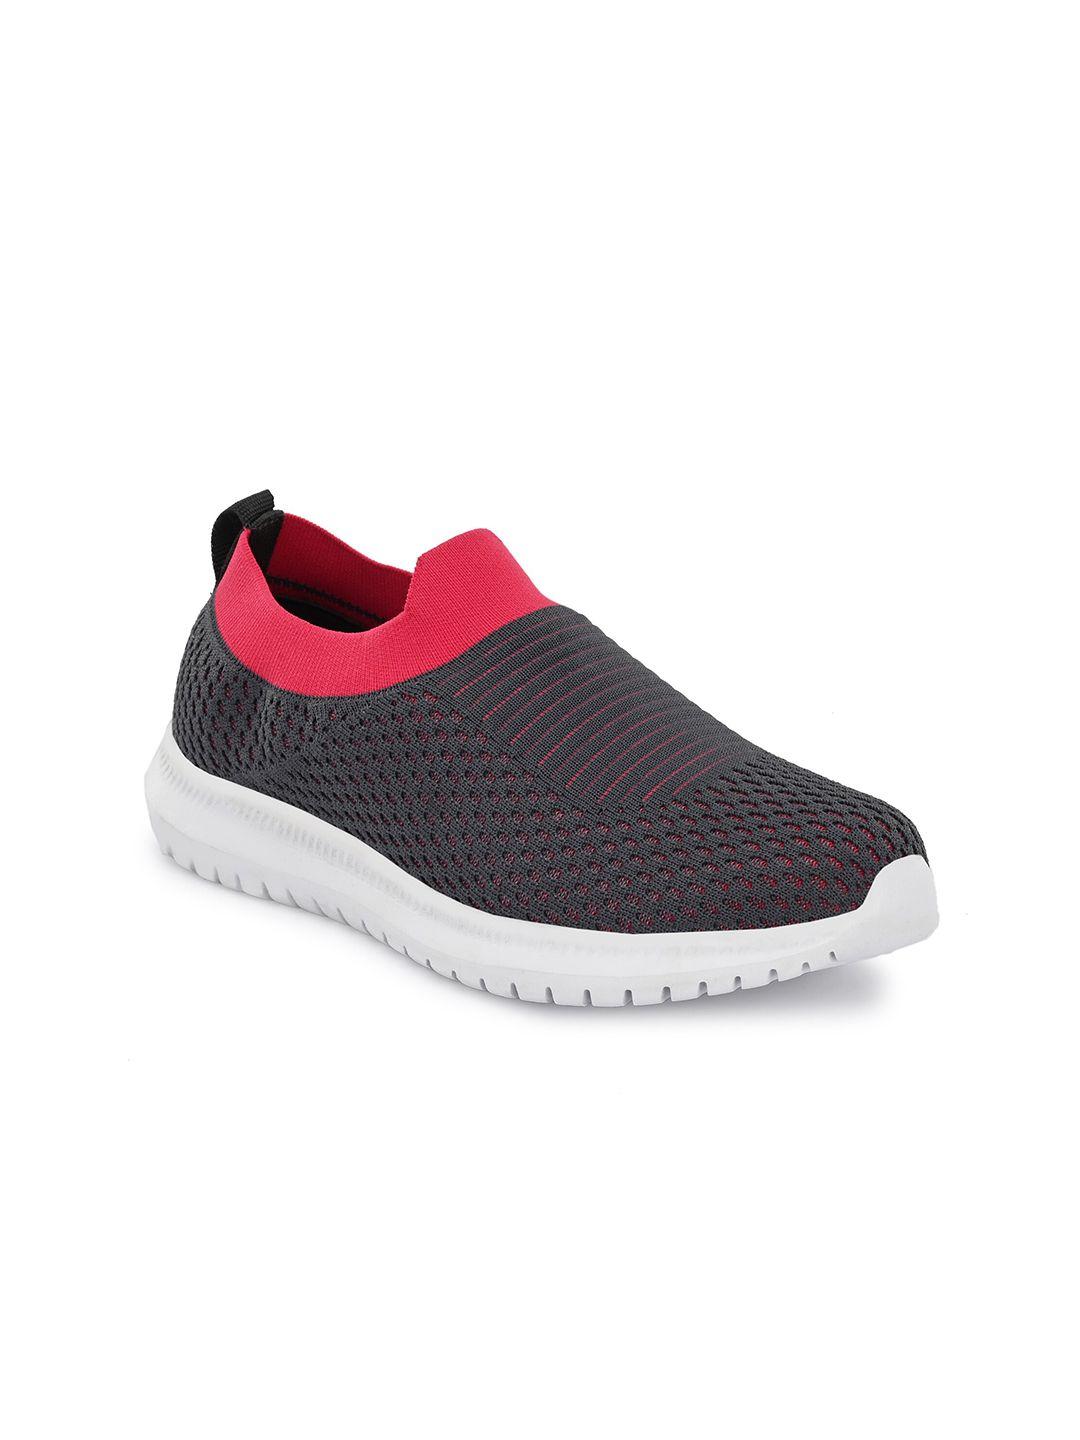 off-limits-women-mesh-mid-top-non-marking-slip-on-walking-shoes